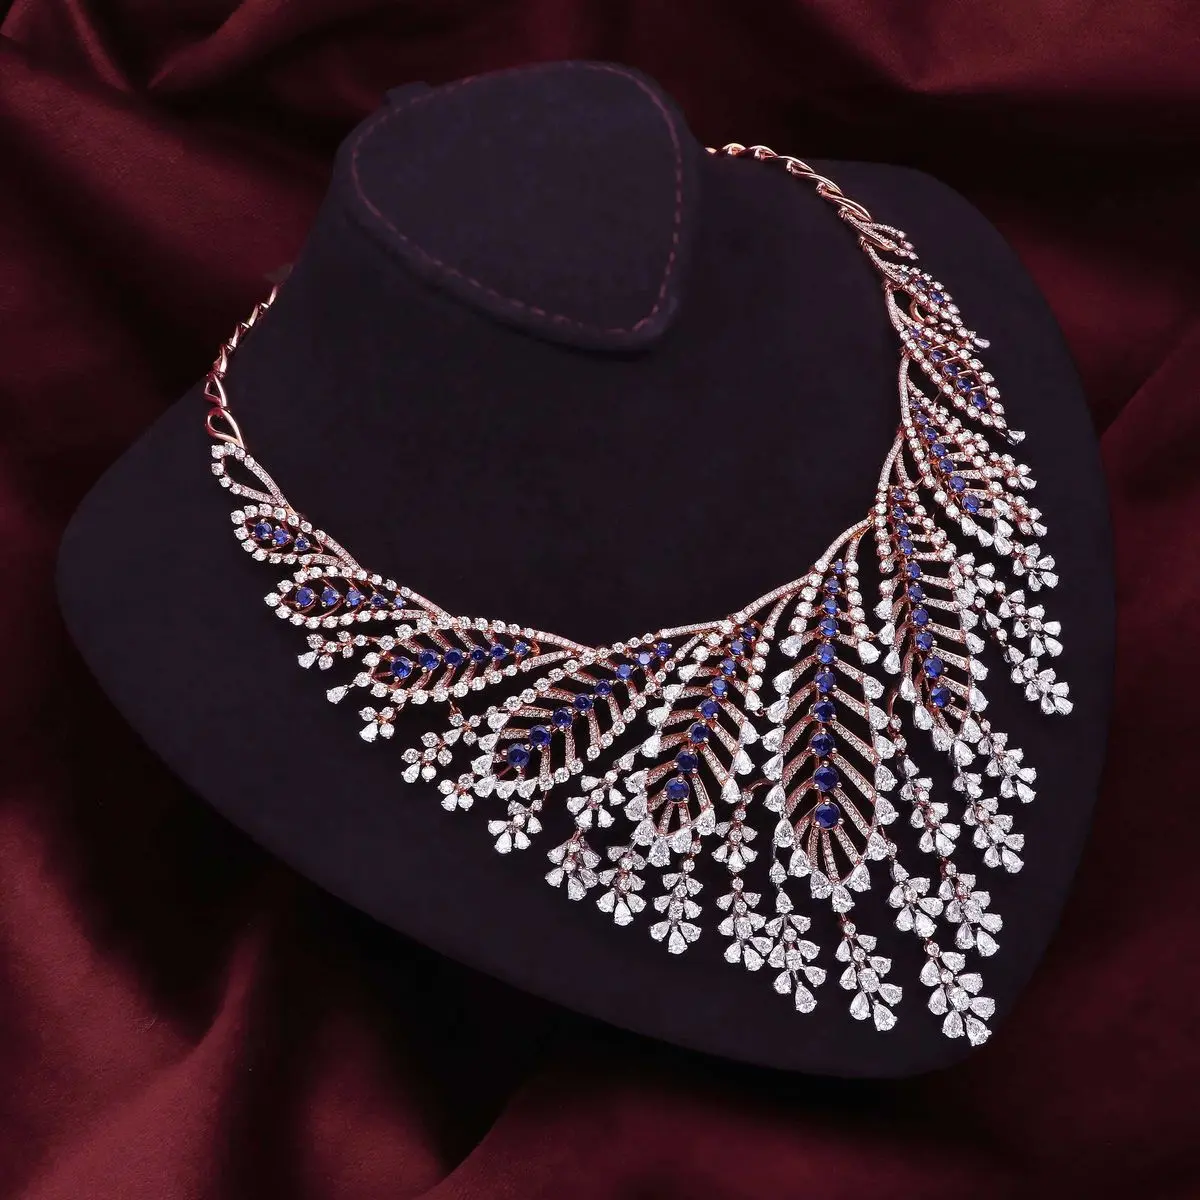 Close-up of Incomparable Diamond Necklace Details